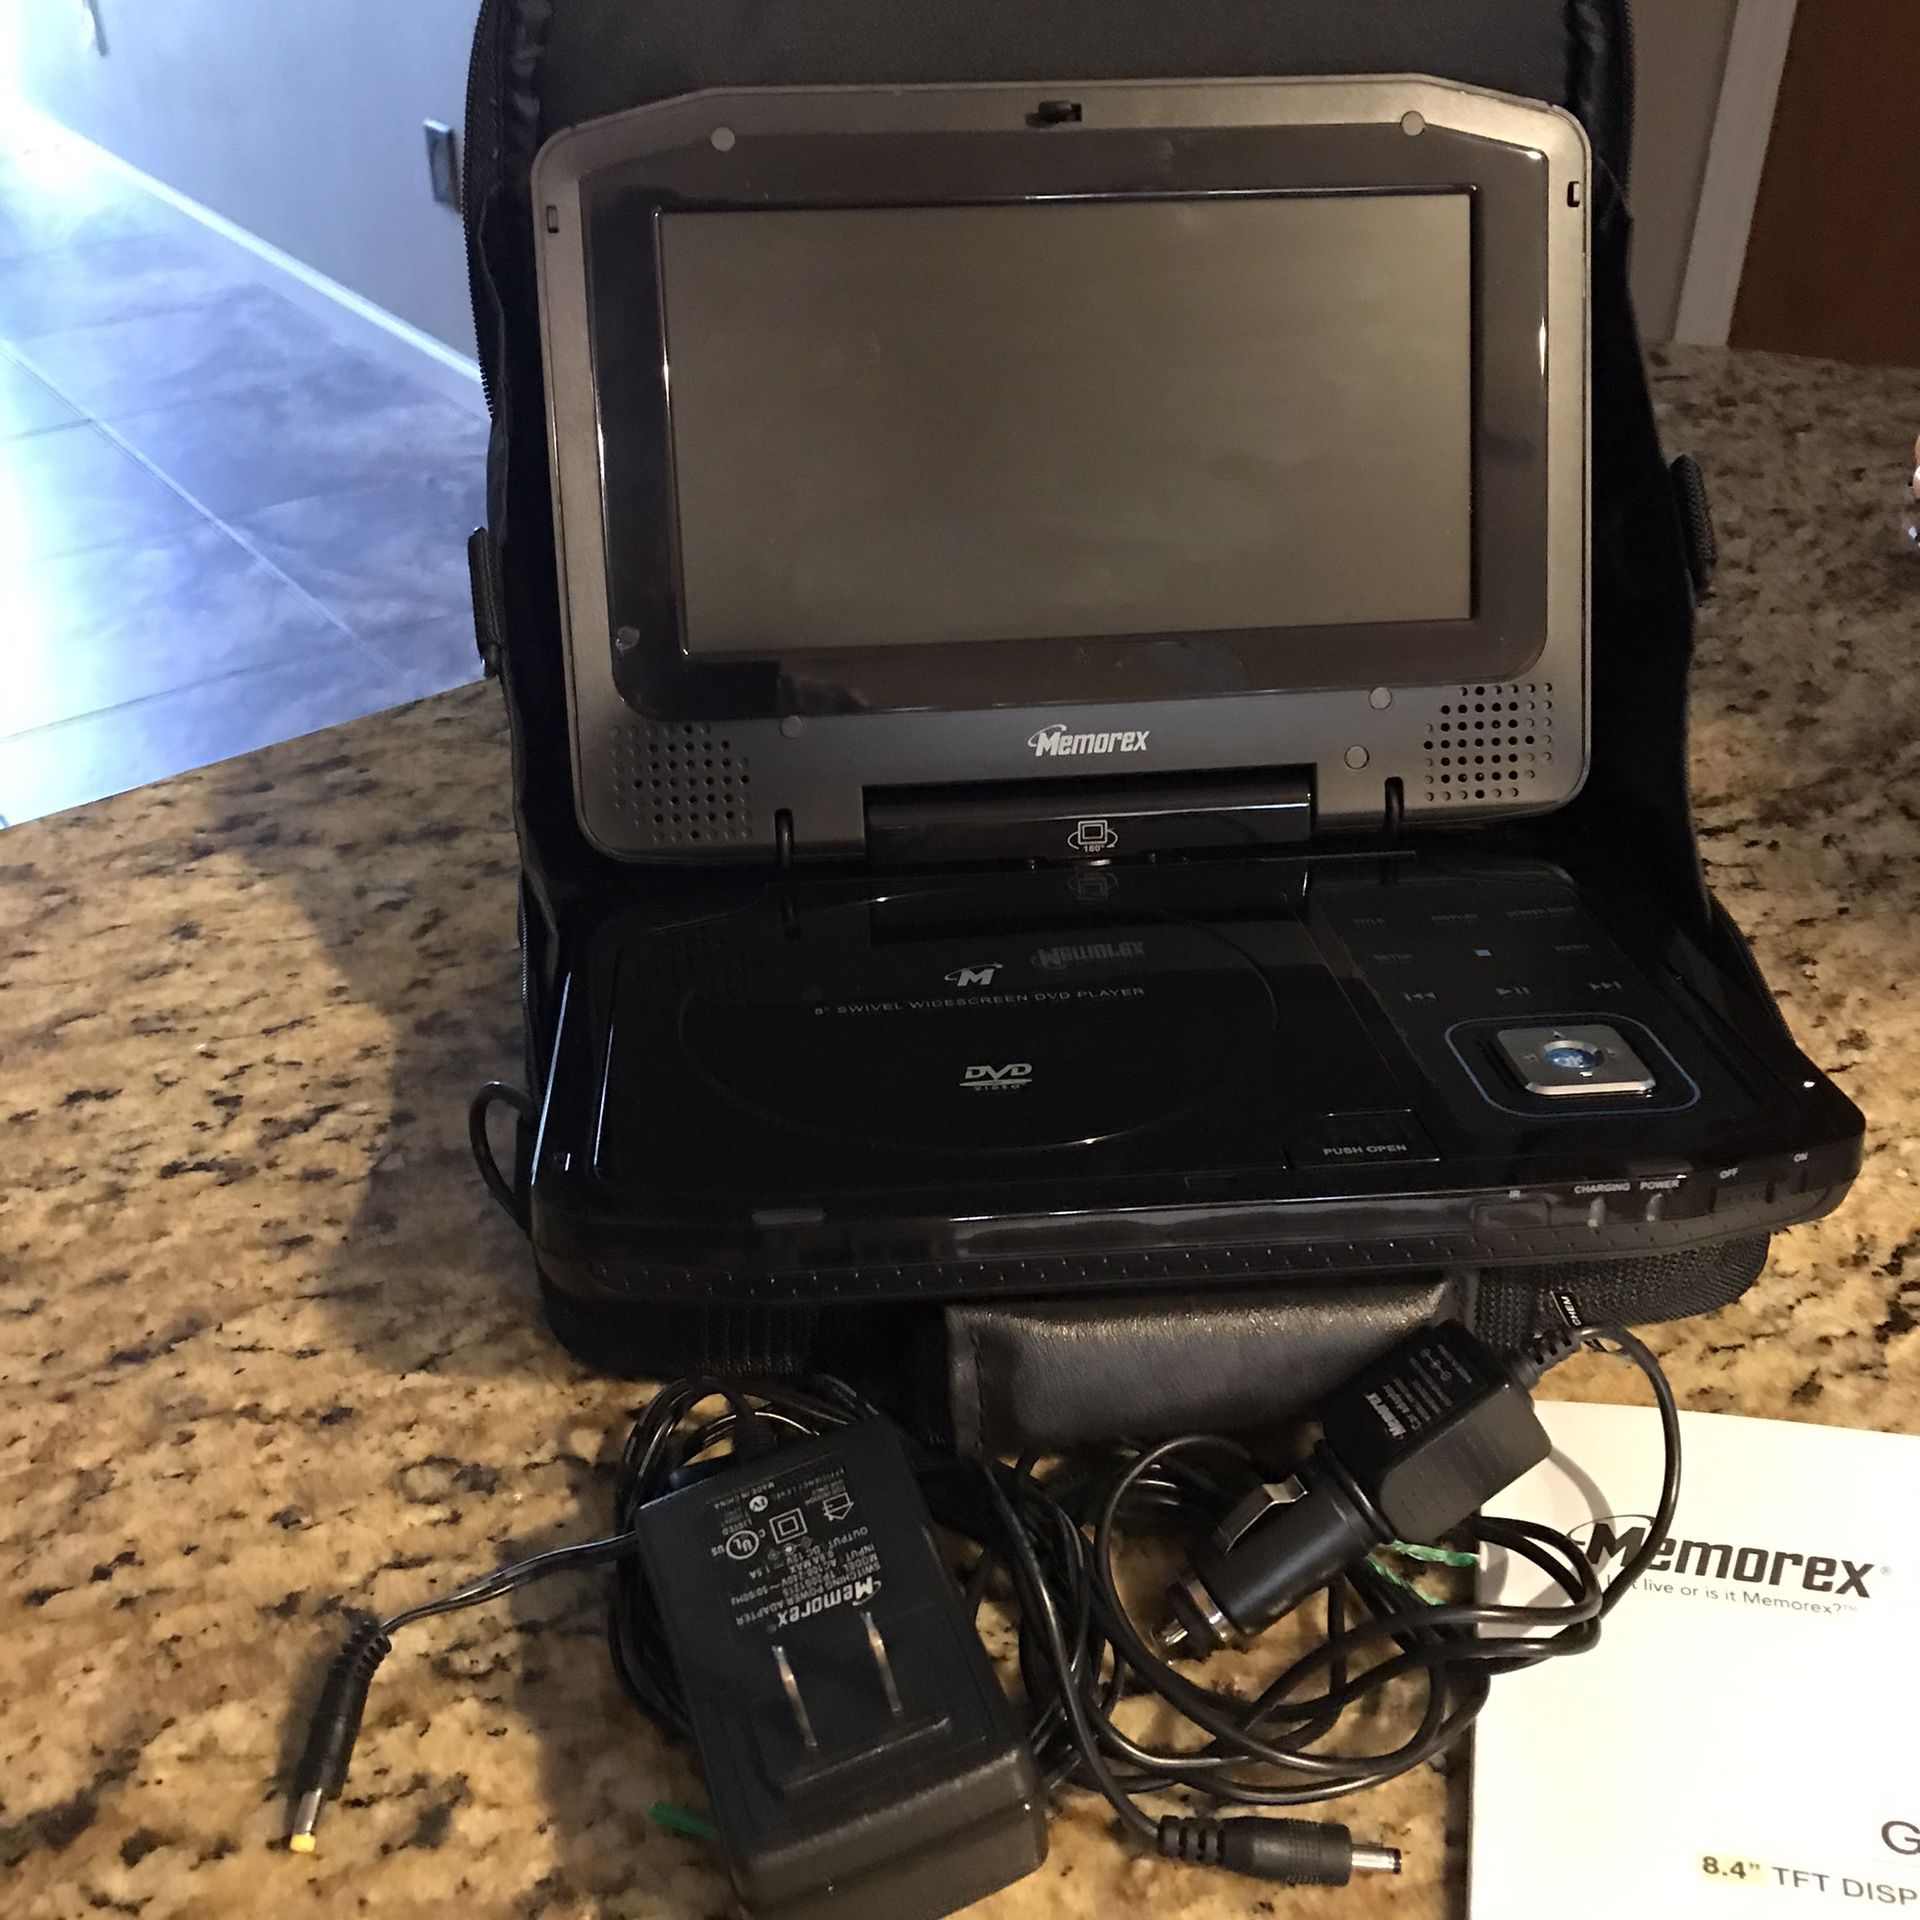 PHILLIPS 8.4” TFT Display Portable DVD Player with Storage Case